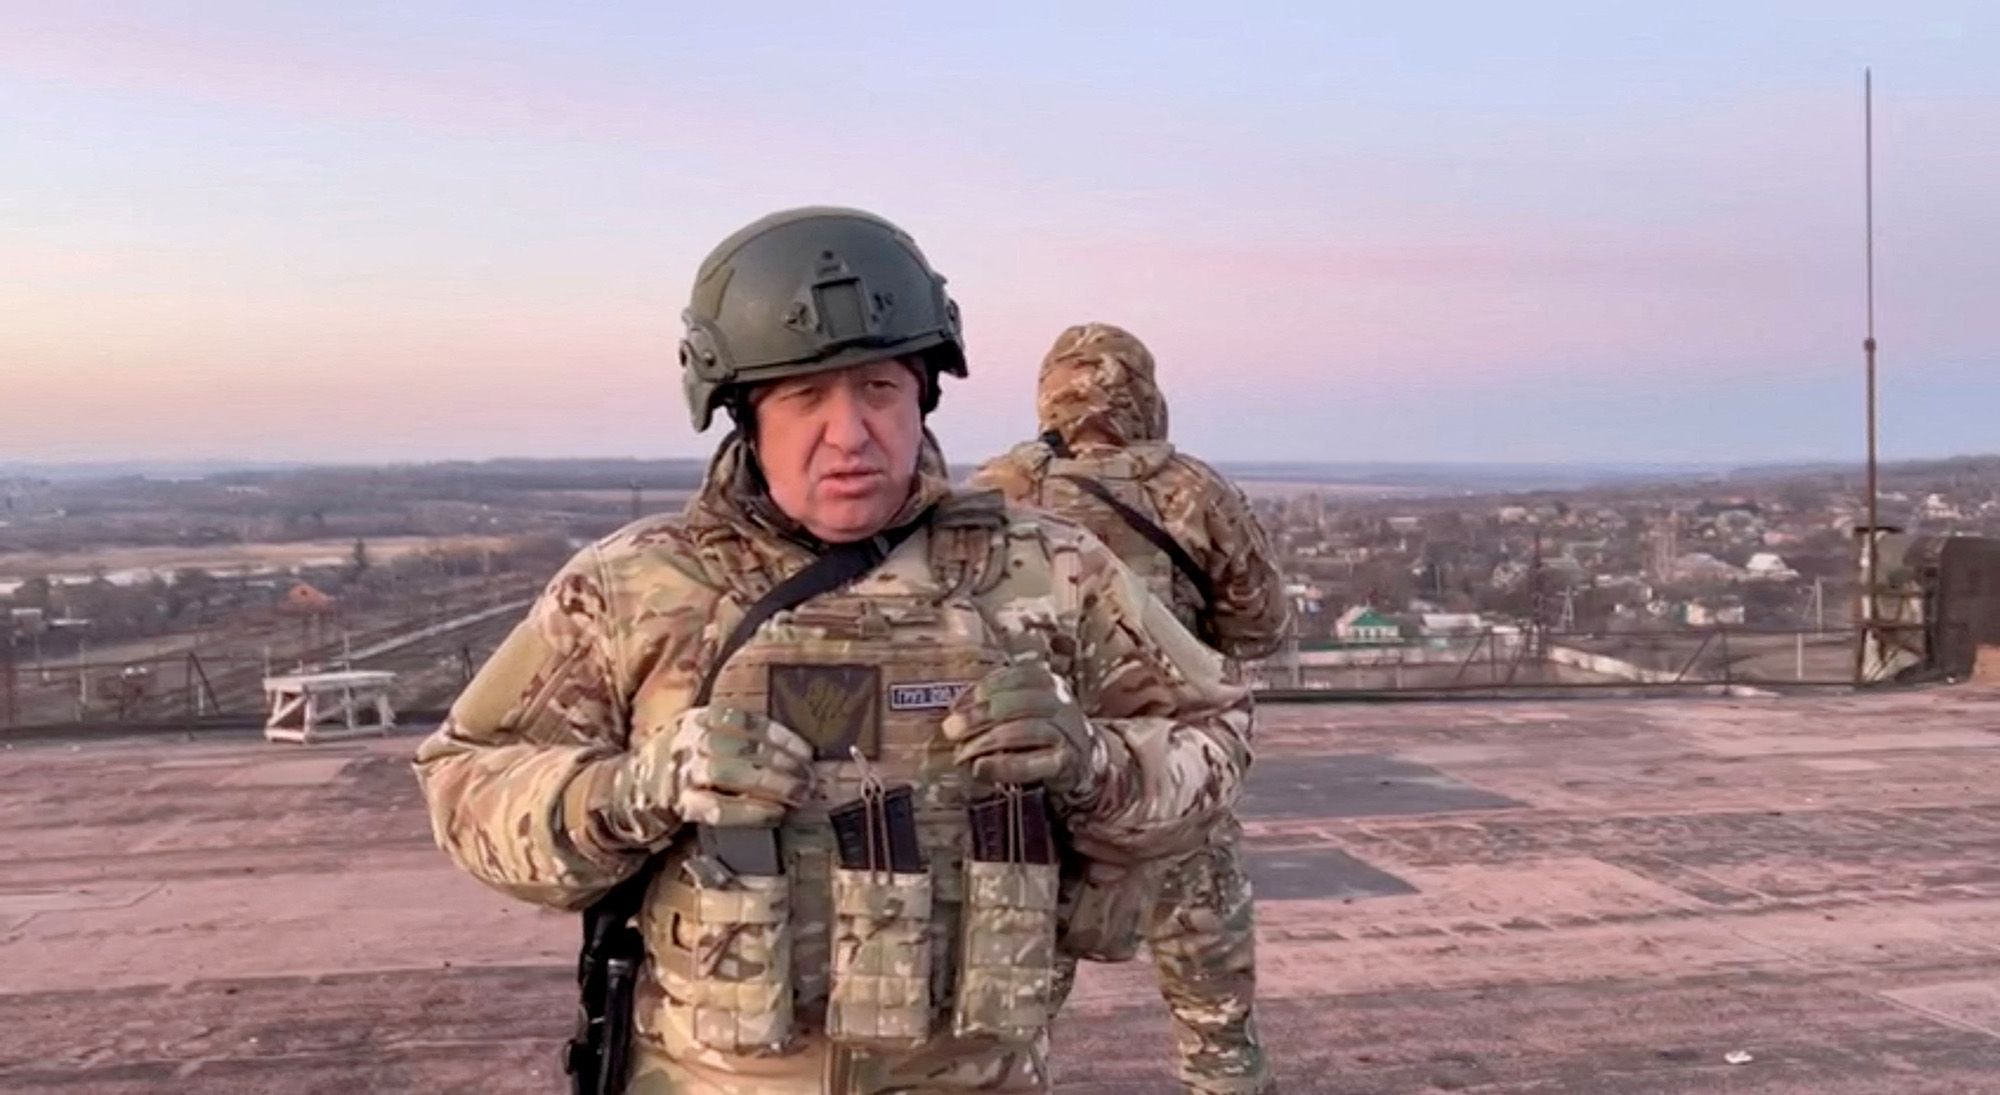 Yevgeny Prigozhin, founder of Russia's Wagner mercenary force, speaks in Paraskoviivka, Ukraine, in this still image from an undated video released on March 3.